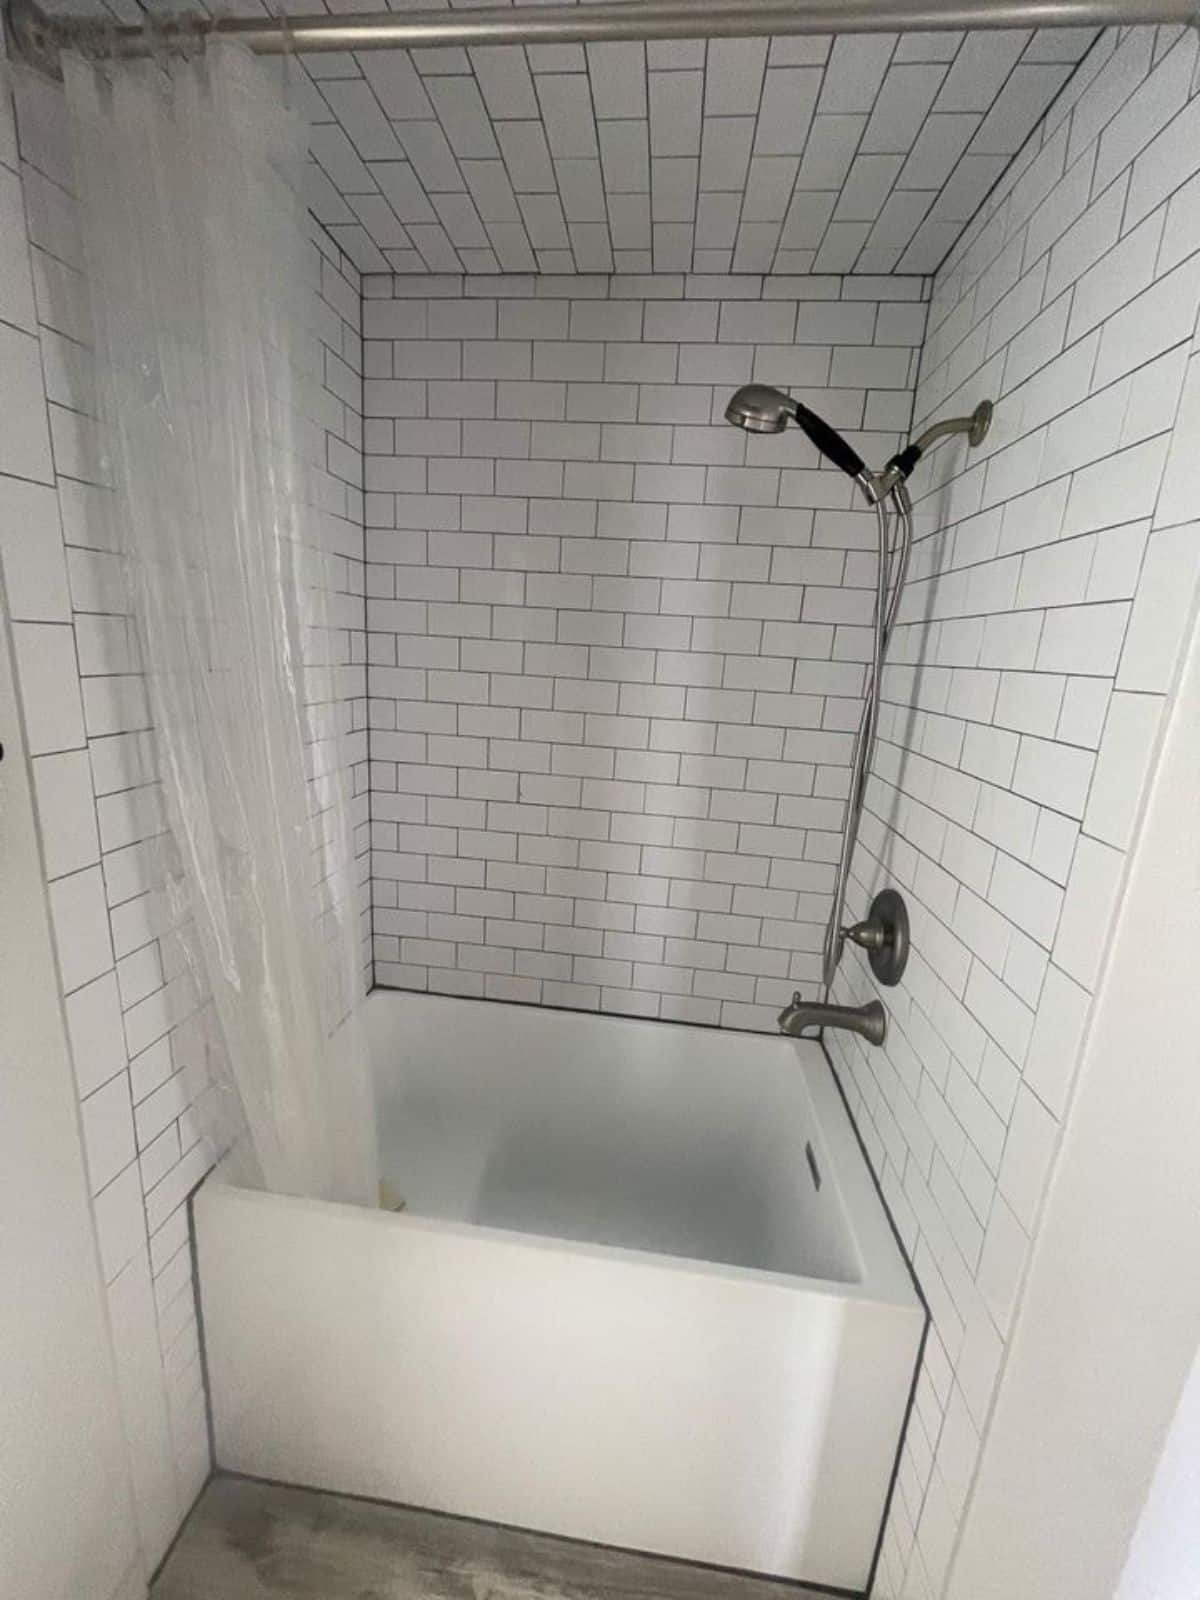 Fully tiled shower area in bathroom of offgrid container home